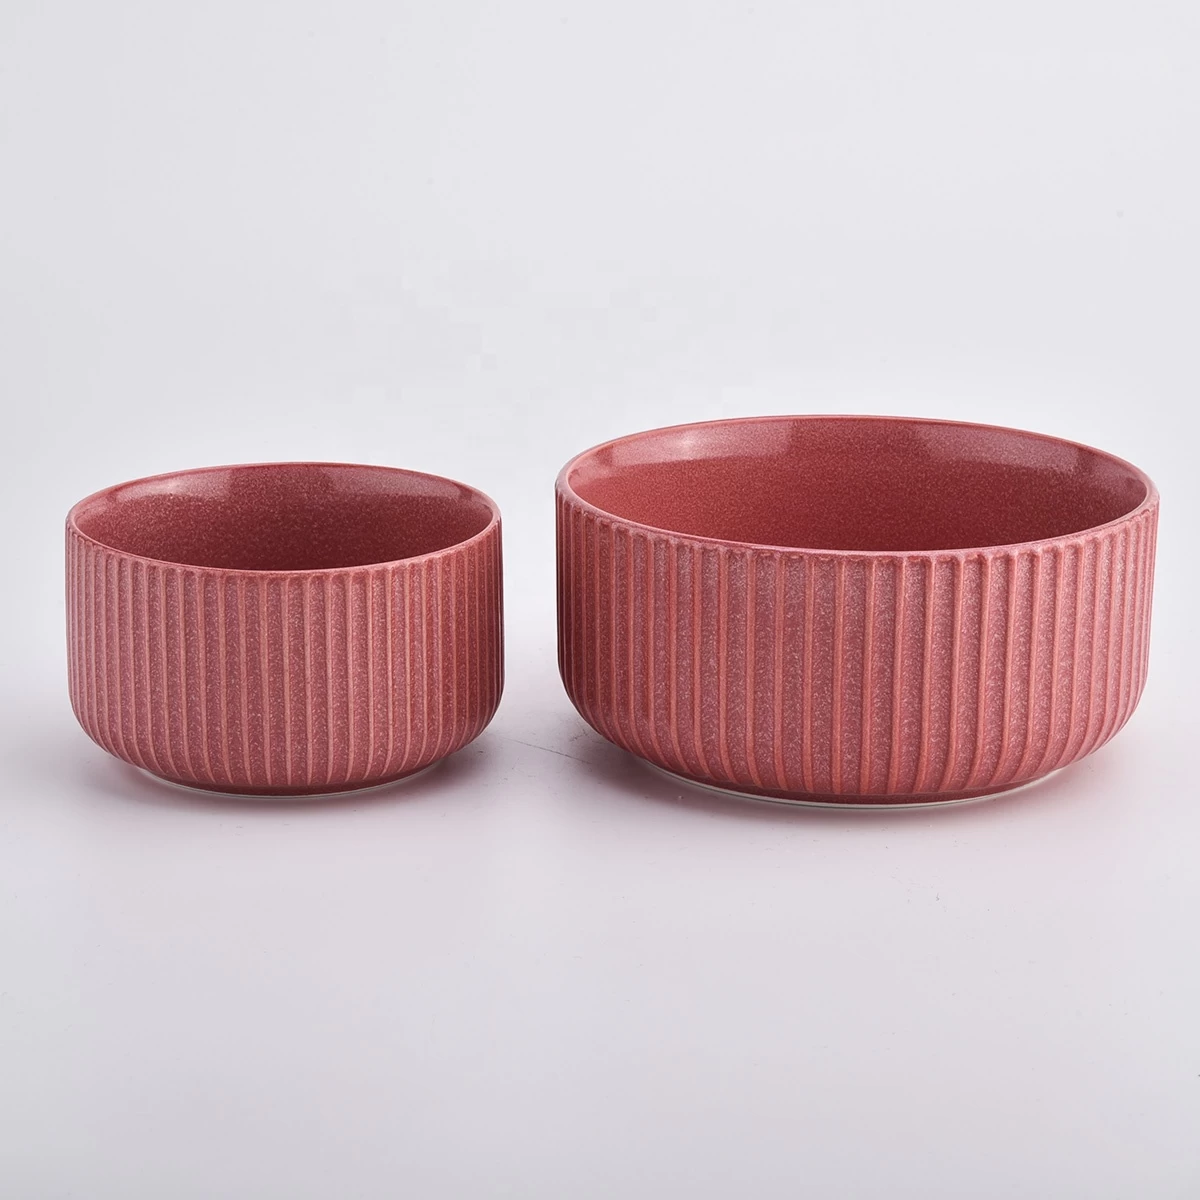 strips red color ceramic candle containers for wax